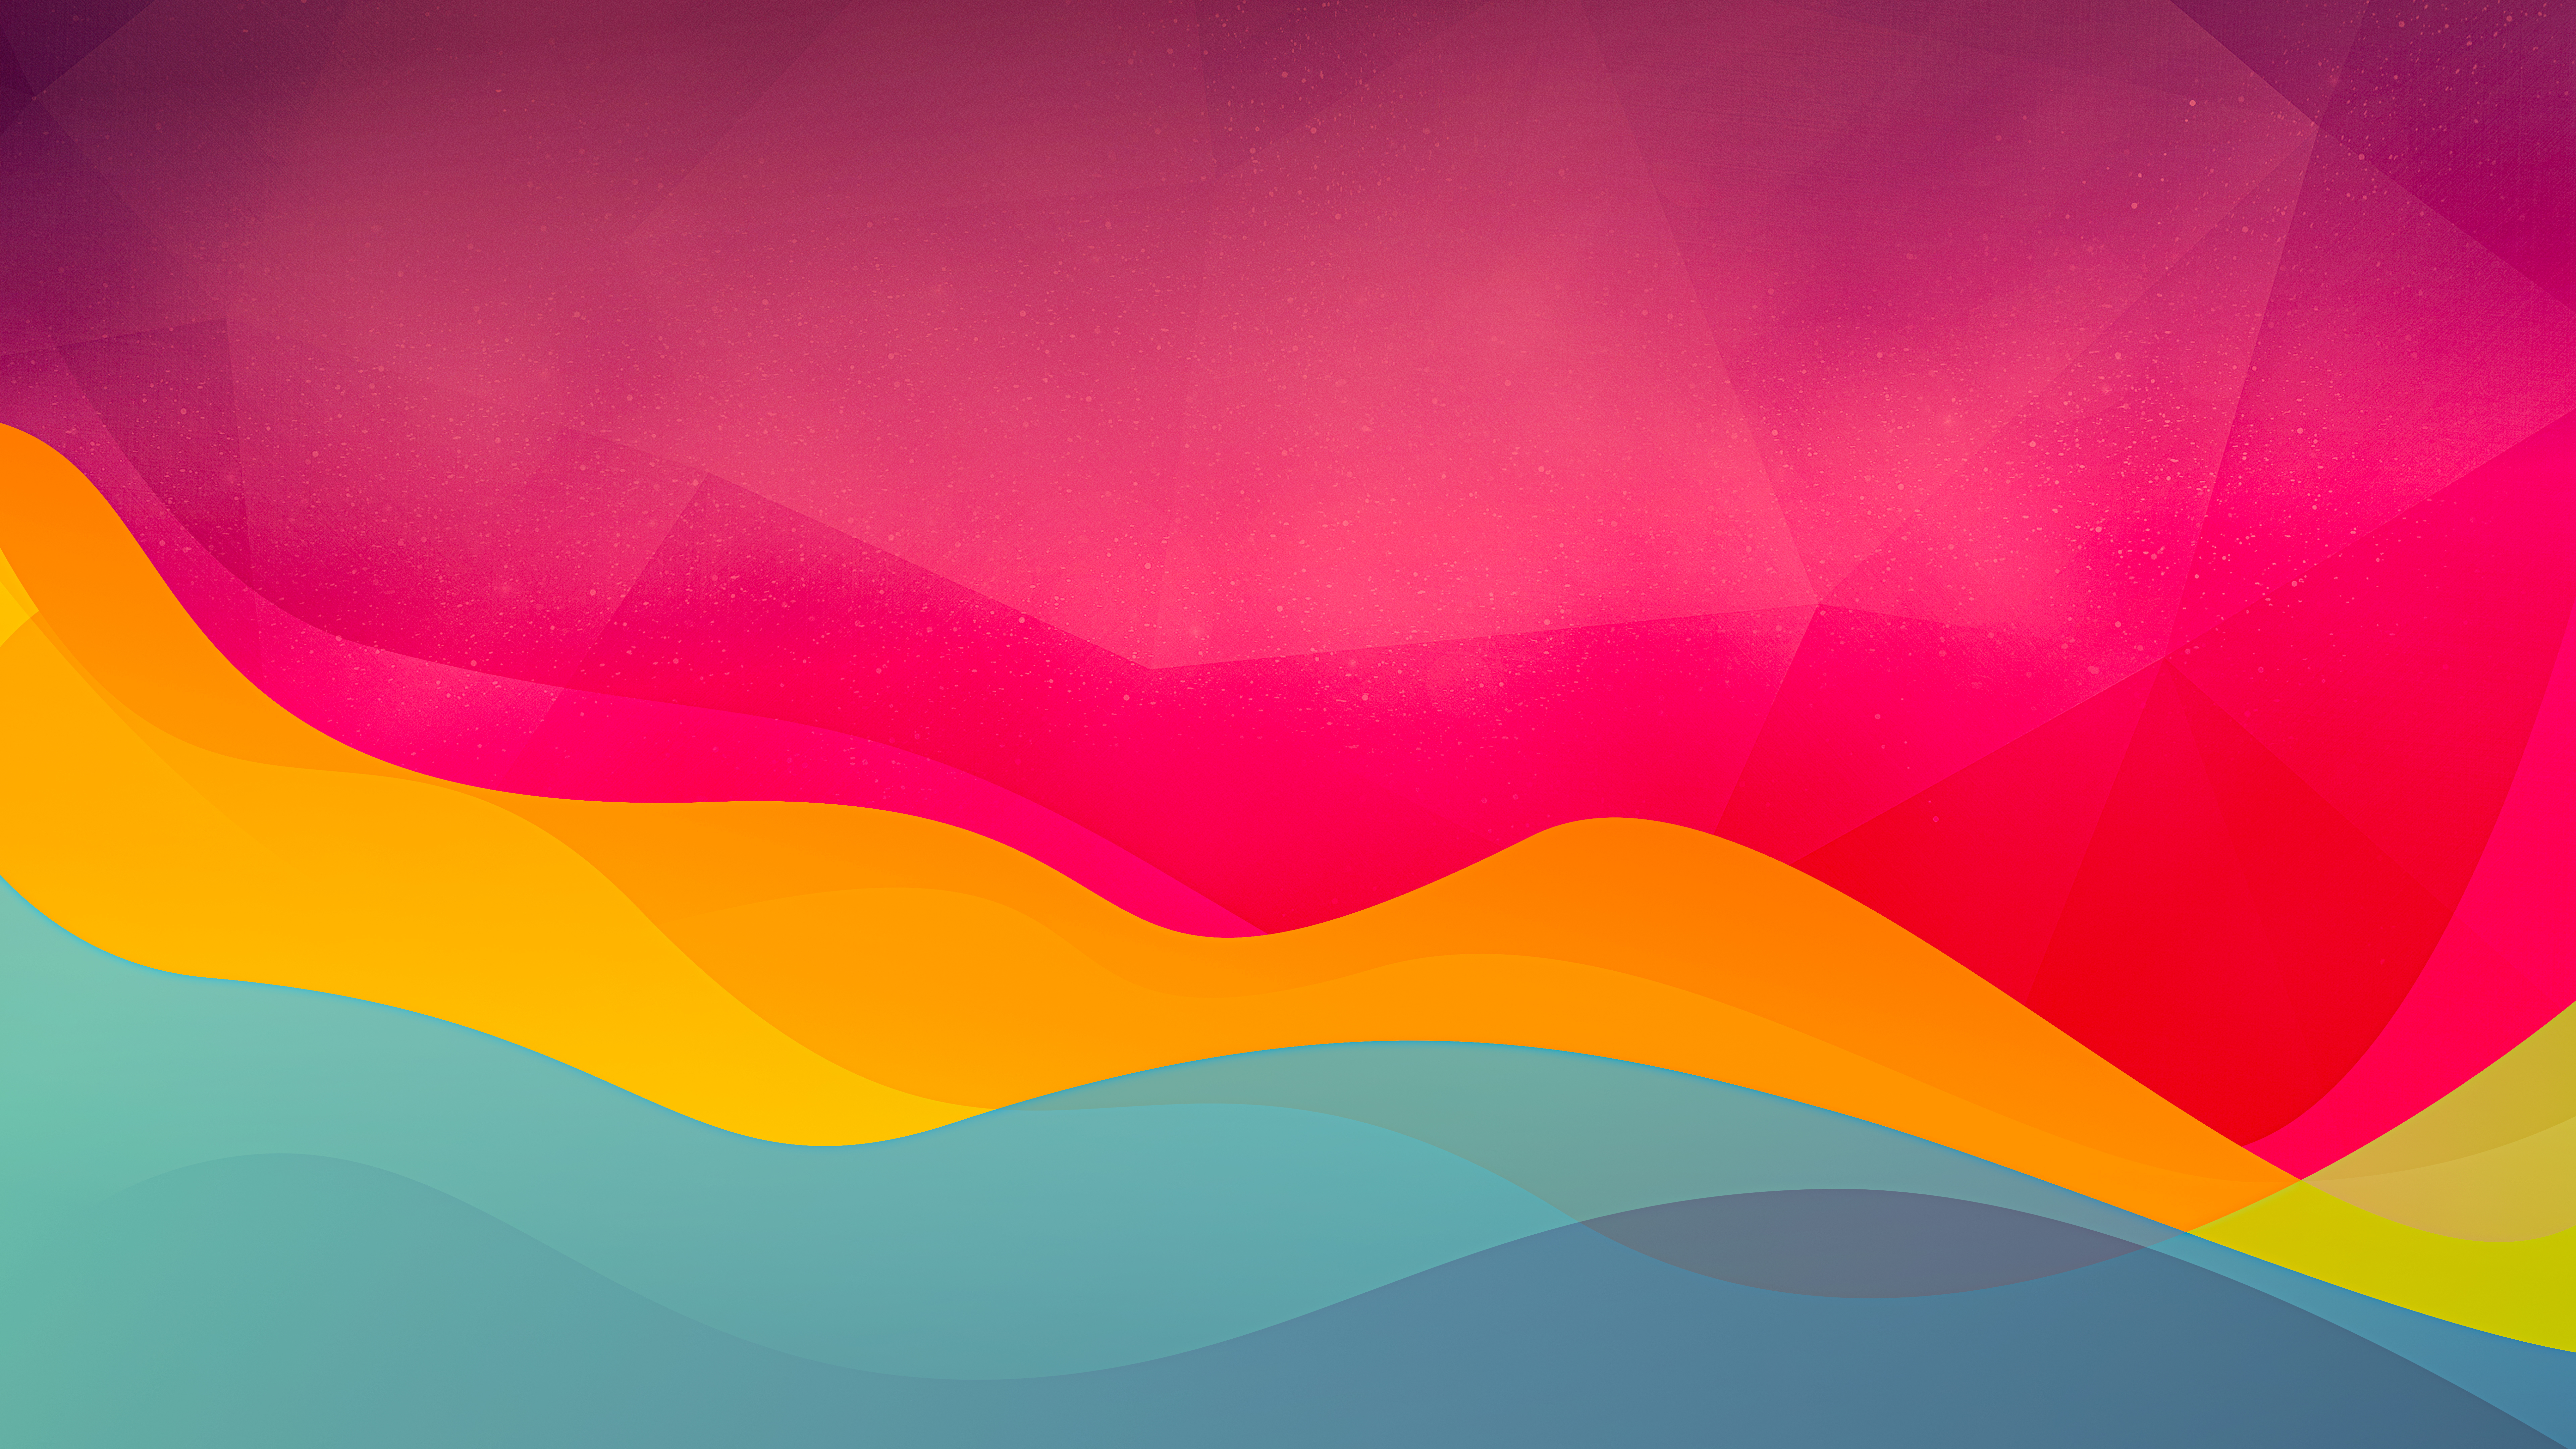 Colorful Abstract Shapes (7680x4320) 8K Wallpaper : r/wallpaper